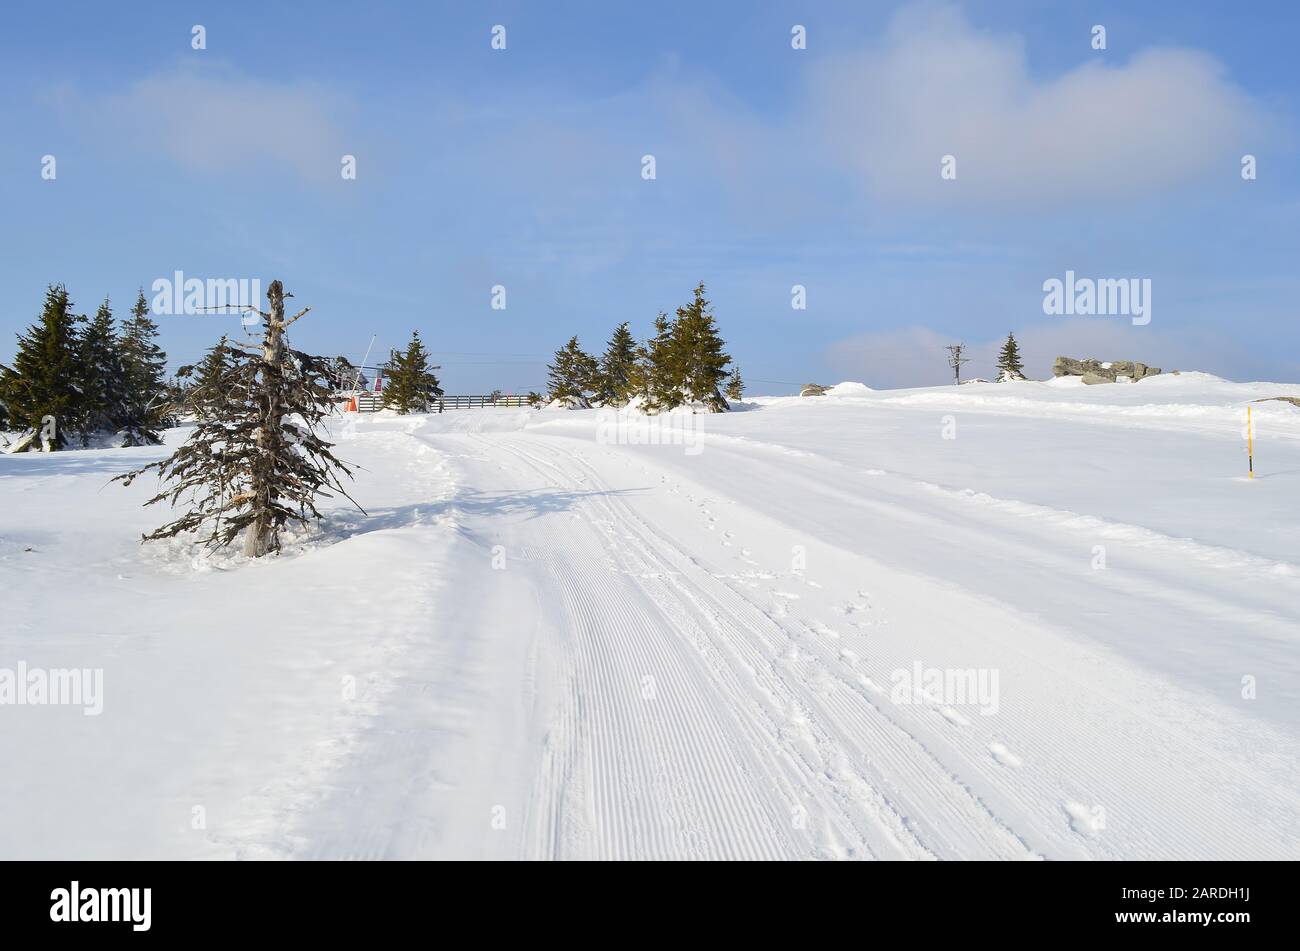 Snowy road besides dead spruce tree, covered by snow, footprints and different snow vehicles trials, leading to ski lift in distance, Kopaonik ski res Stock Photo